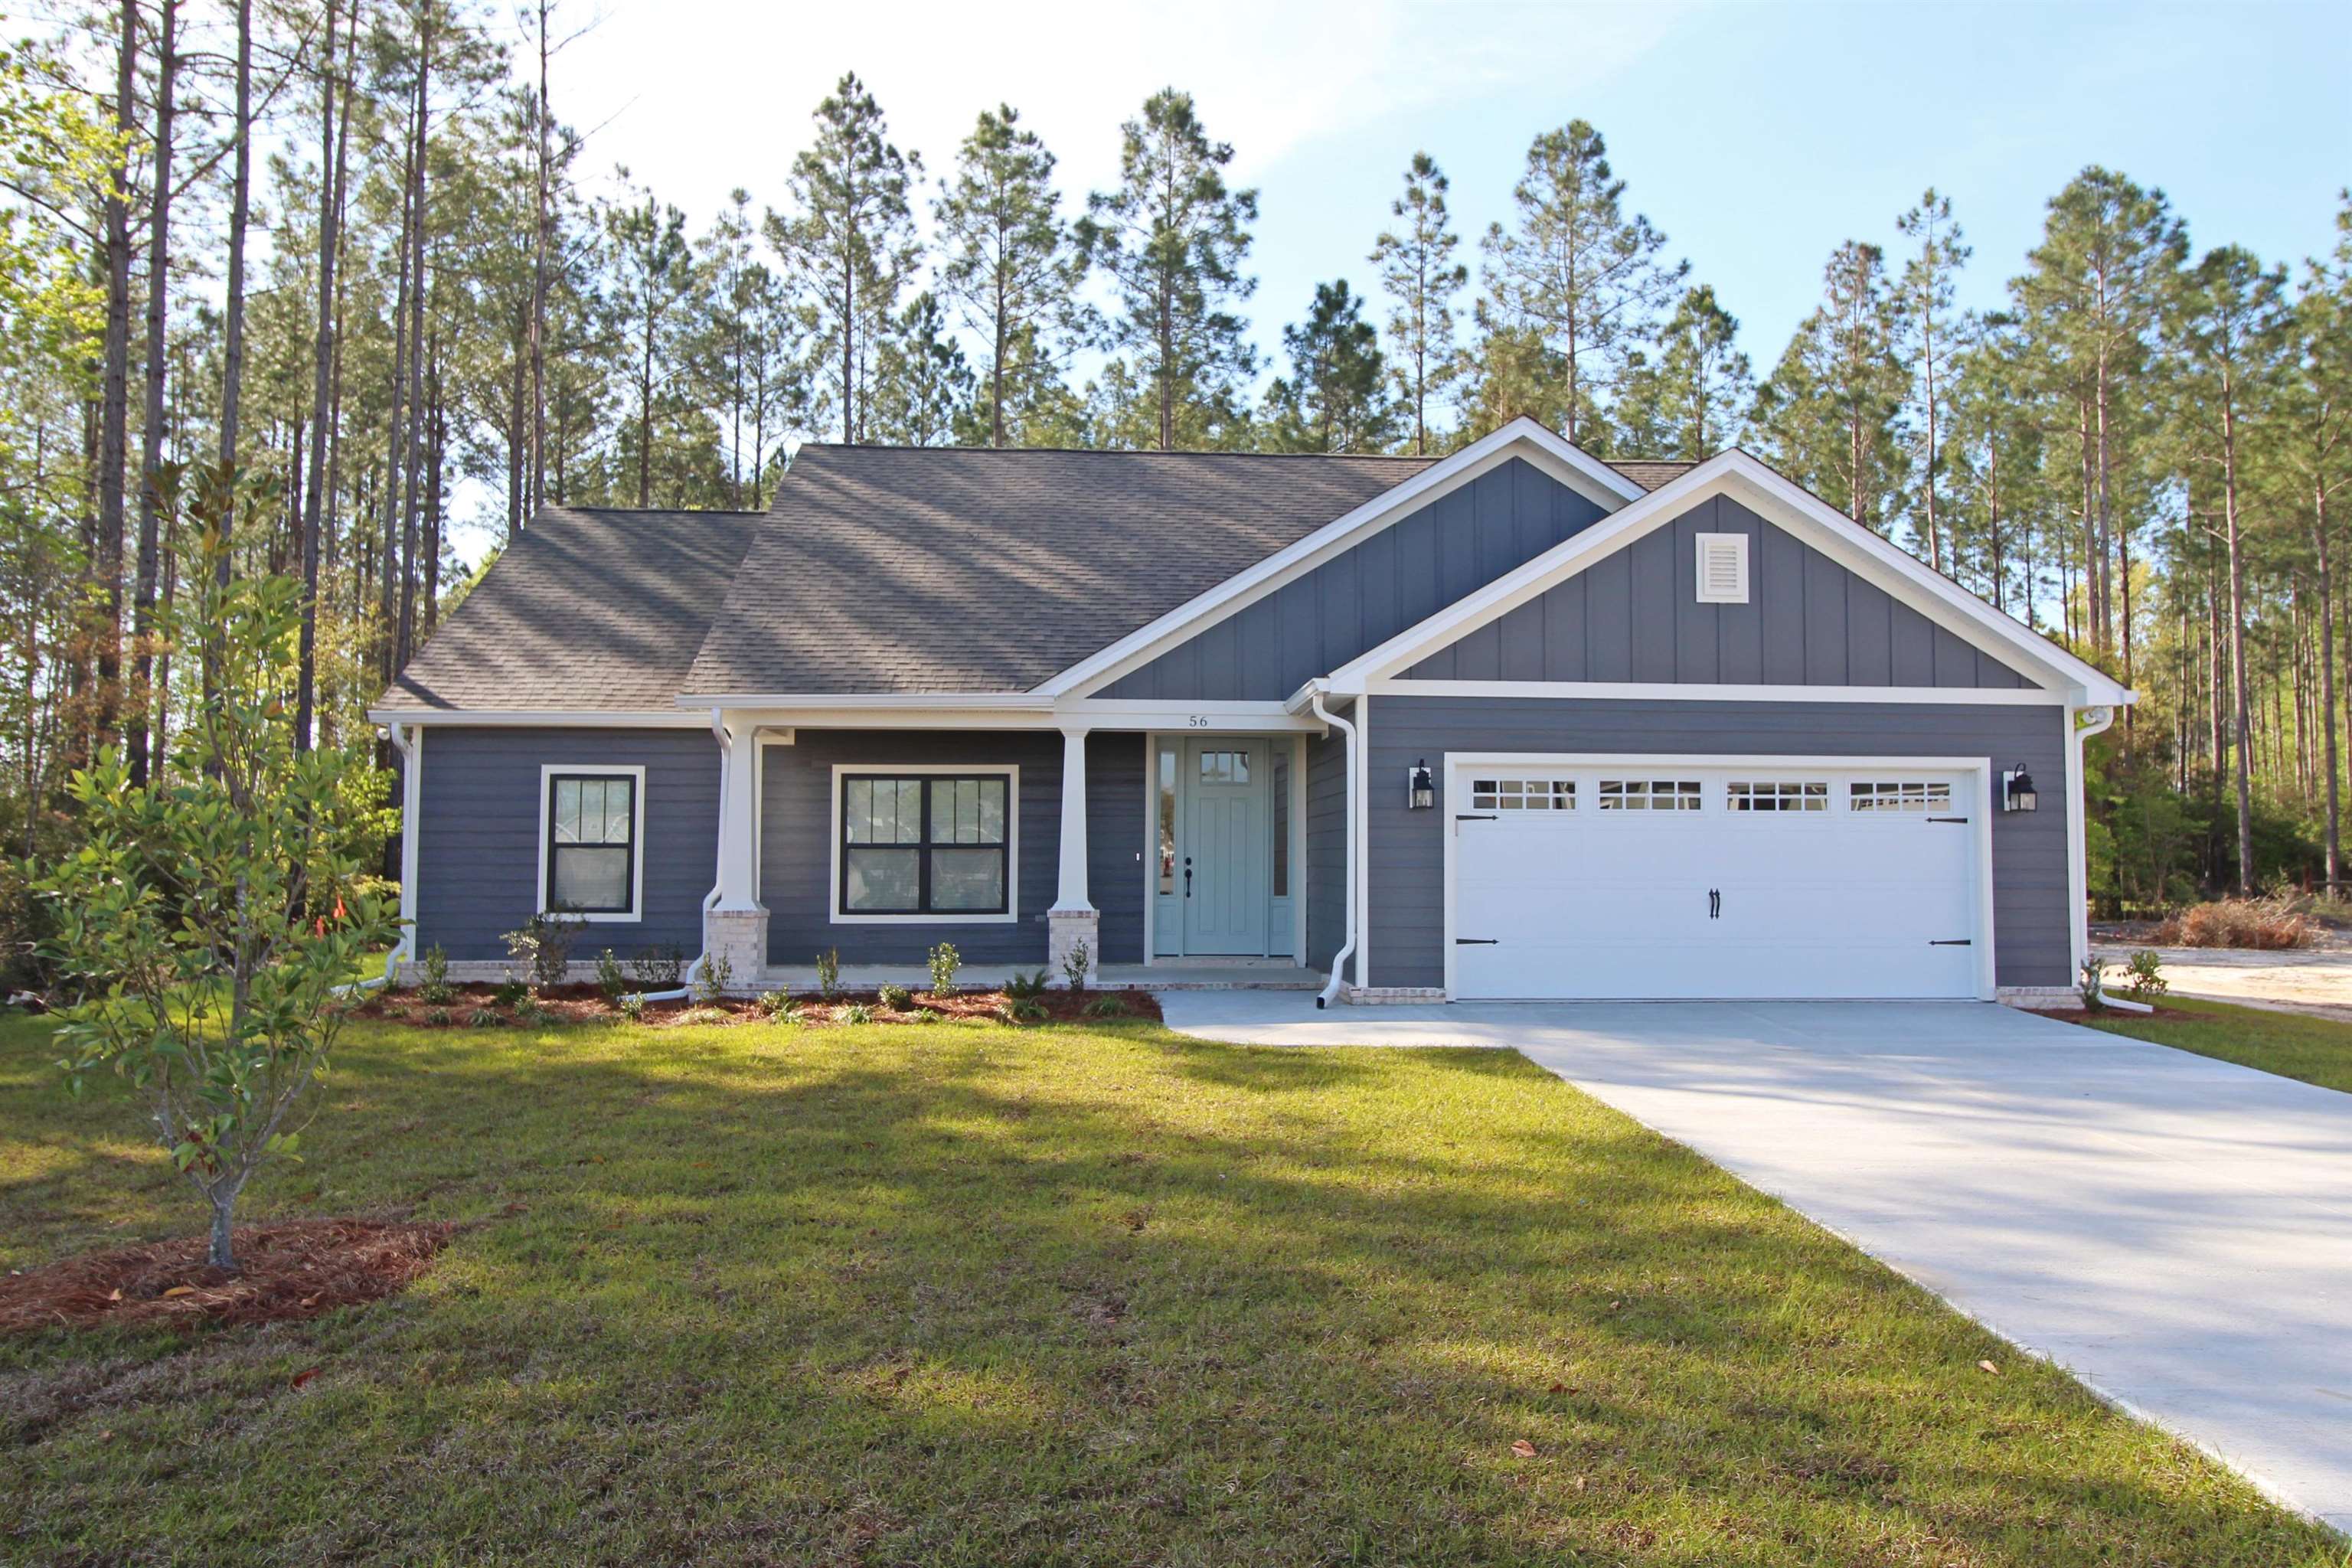 119 Shelby Drive,CRAWFORDVILLE,Florida 32327,3 Bedrooms Bedrooms,2 BathroomsBathrooms,Detached single family,119 Shelby Drive,369707